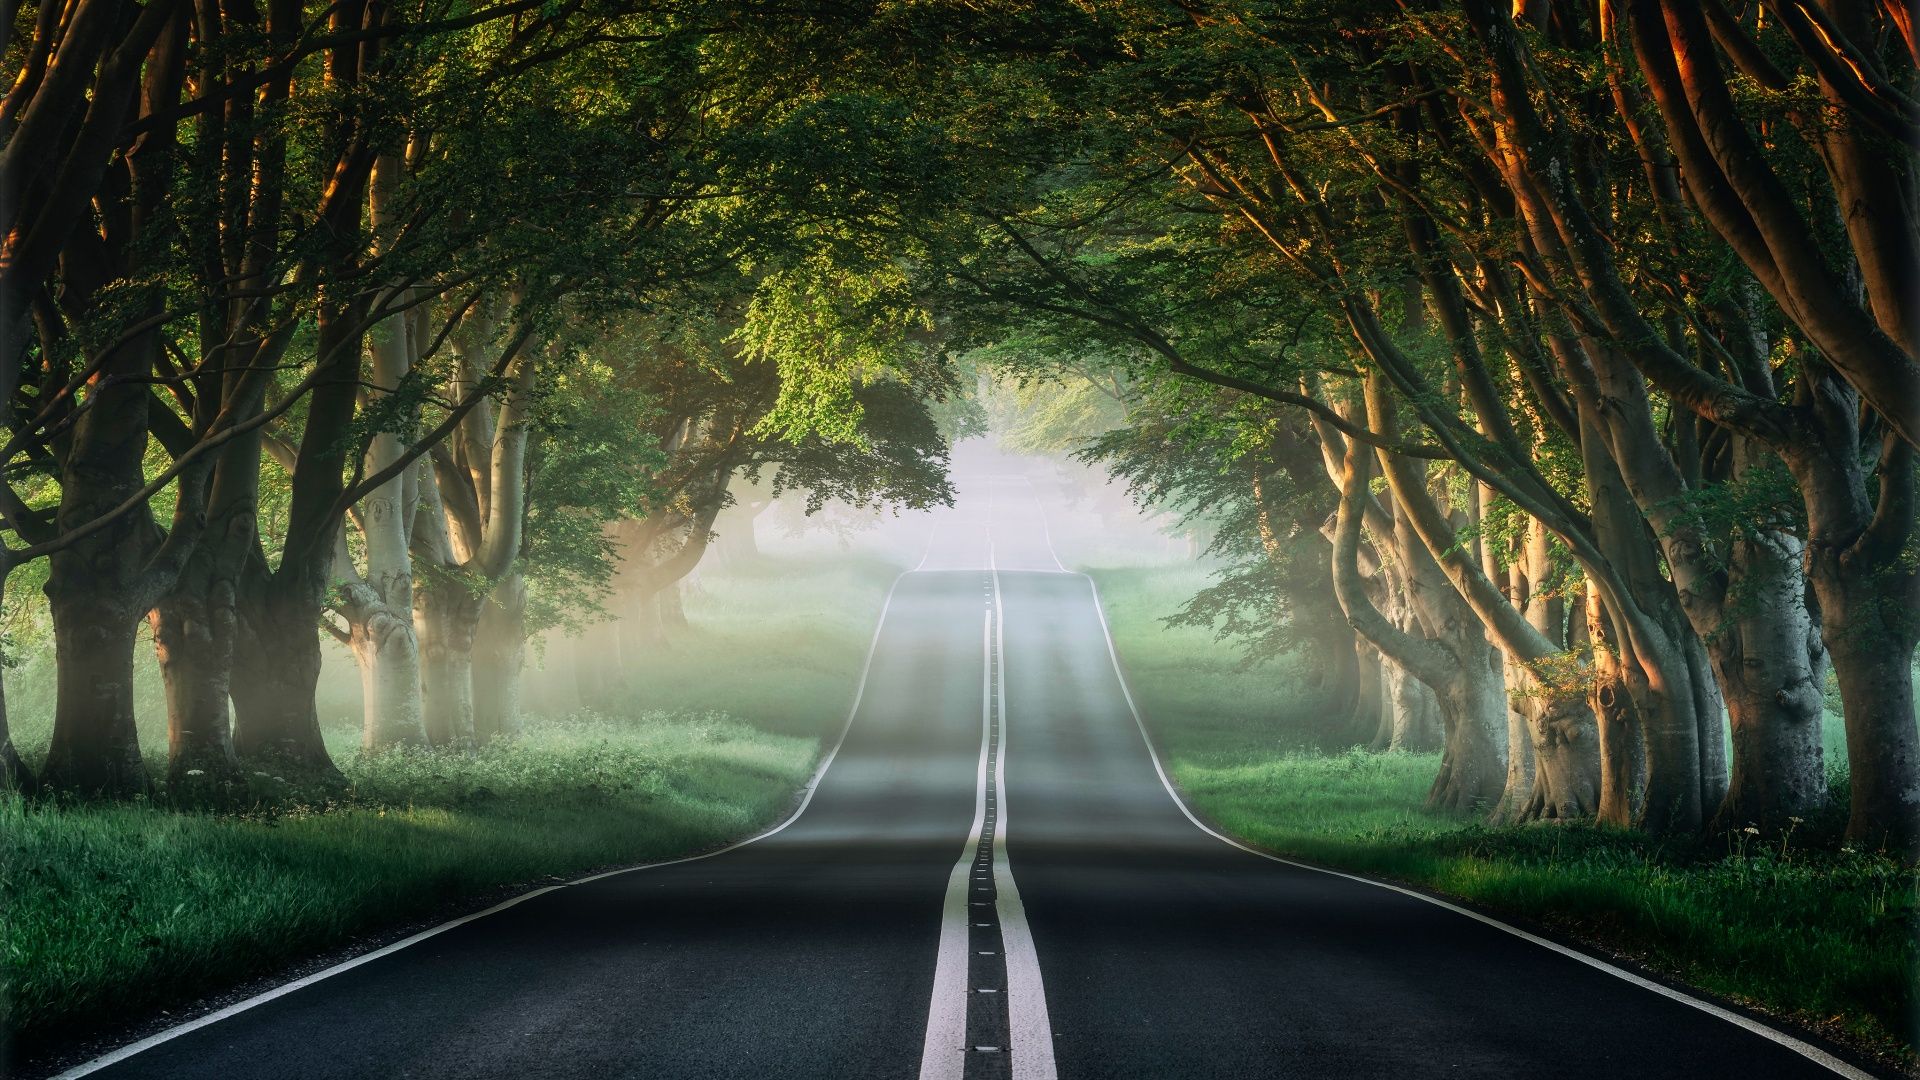 Forest Road Mist Avenue Trees Plants Green Spring Foggy